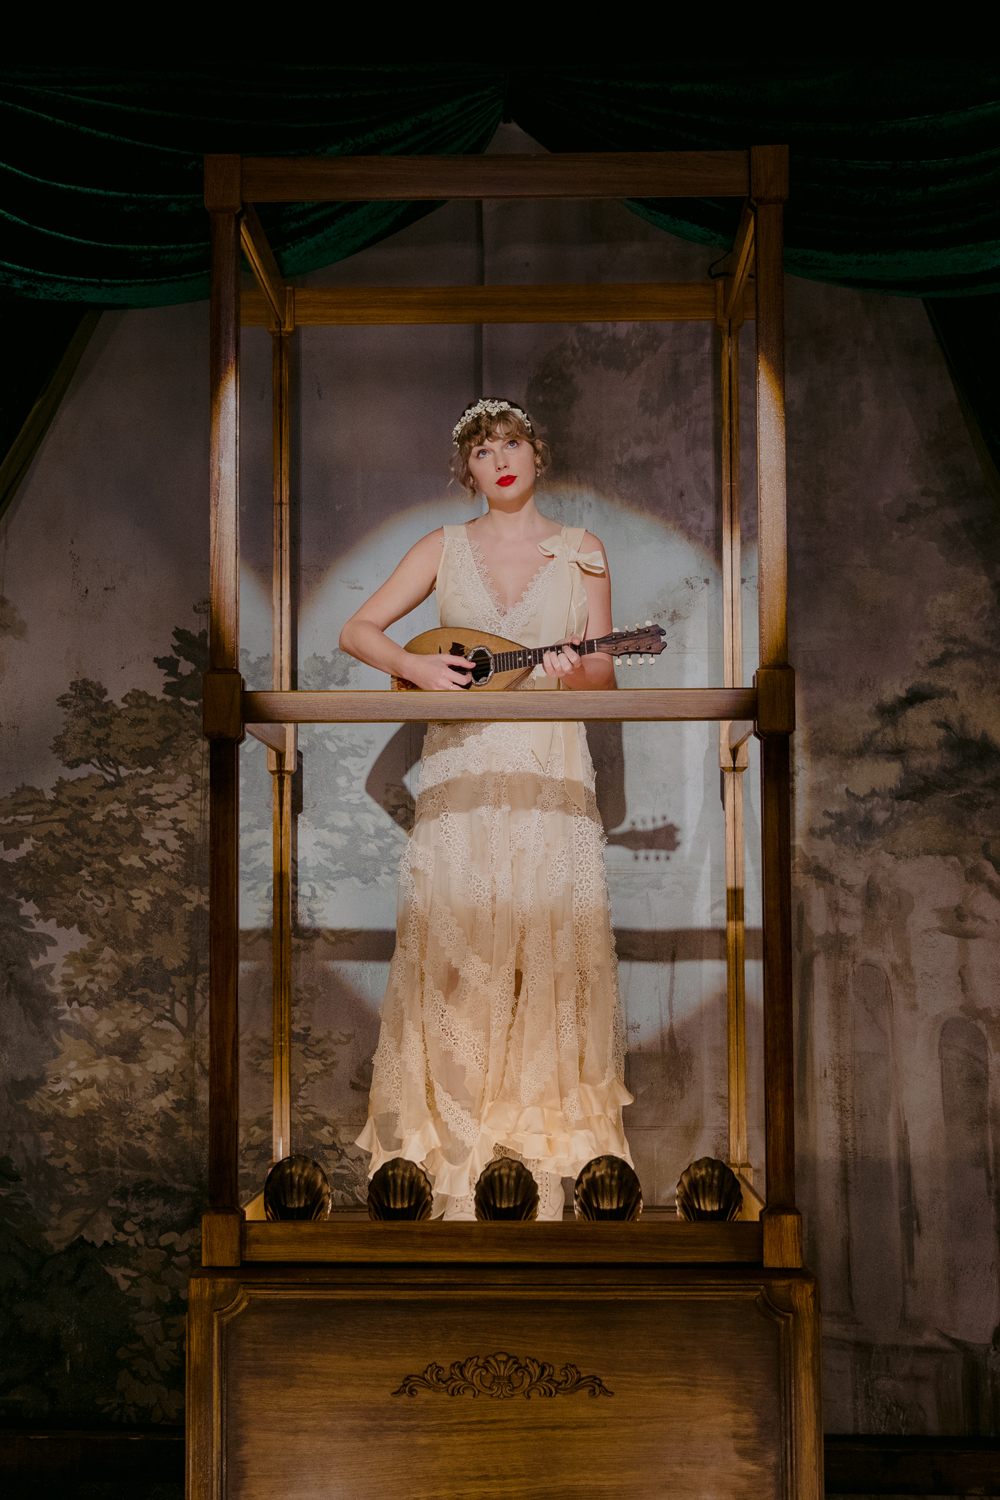 A Free Taylor Swift Exhibition Is Coming To The V&A This Month